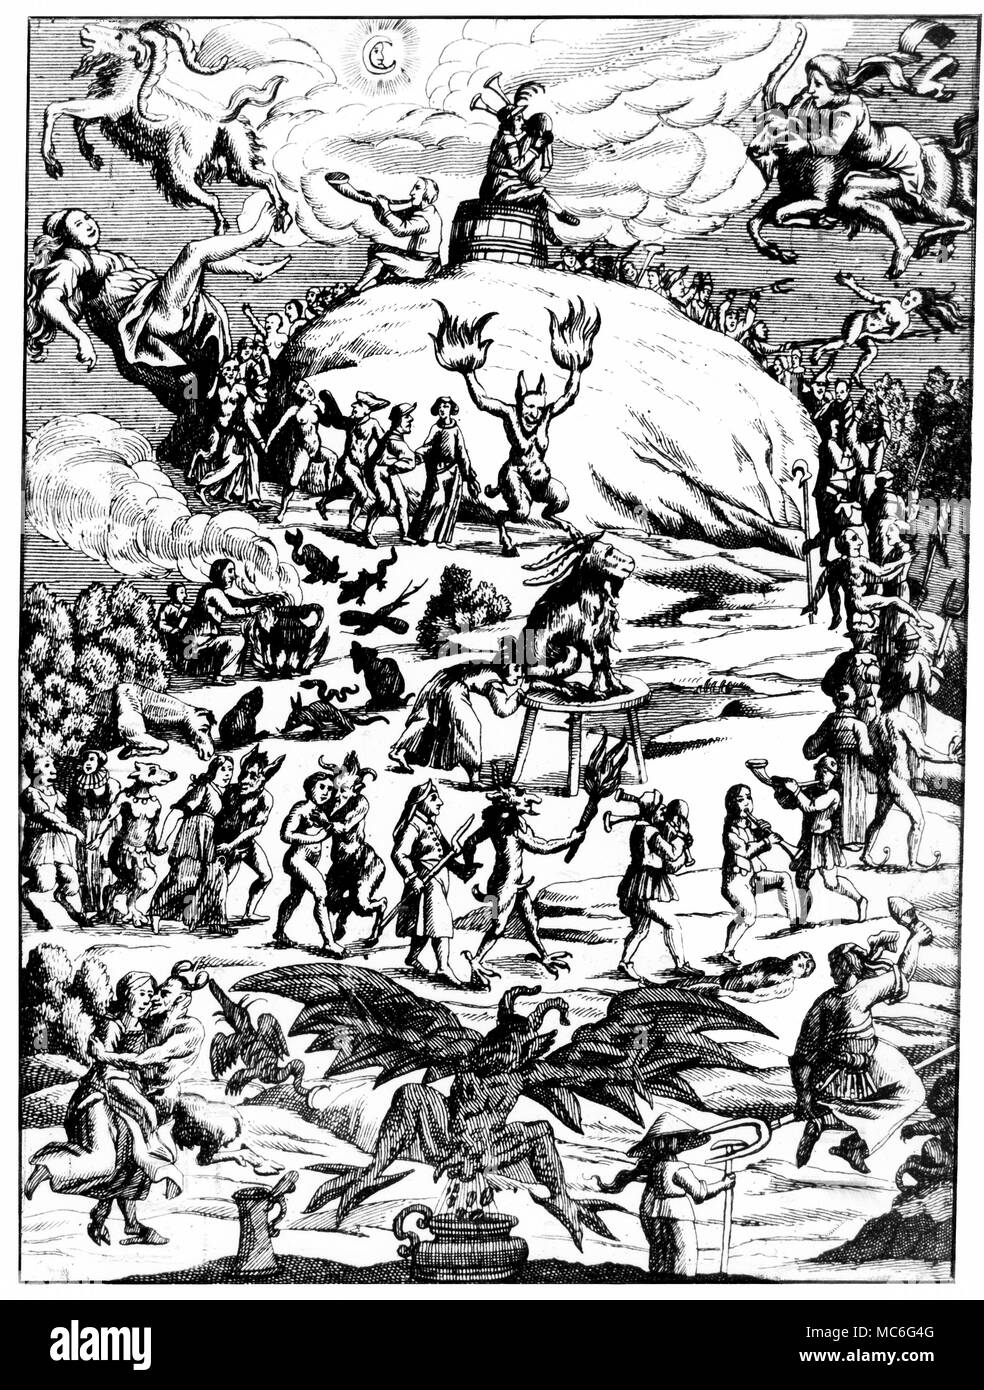 WITCHCRAFT - SABBAT - DEMONS Woodcut depicting the many supposed activities of the witches at the Sabbat - top left a witch is falling from a transvecting goat, and to the right another witch is more successful in her flight. A crowd of witches dance around the hillocks, following a demon with lighted hands. Dominant, in the cenre, the Devil himself, in the shape of a goat, receives the osculum infamis, or the kiss on the buttocks, from one of his devotees. Around this Devil a group of musicians and Devils disport, some of the latter sexually attacking female witches. The black winged mo Stock Photo